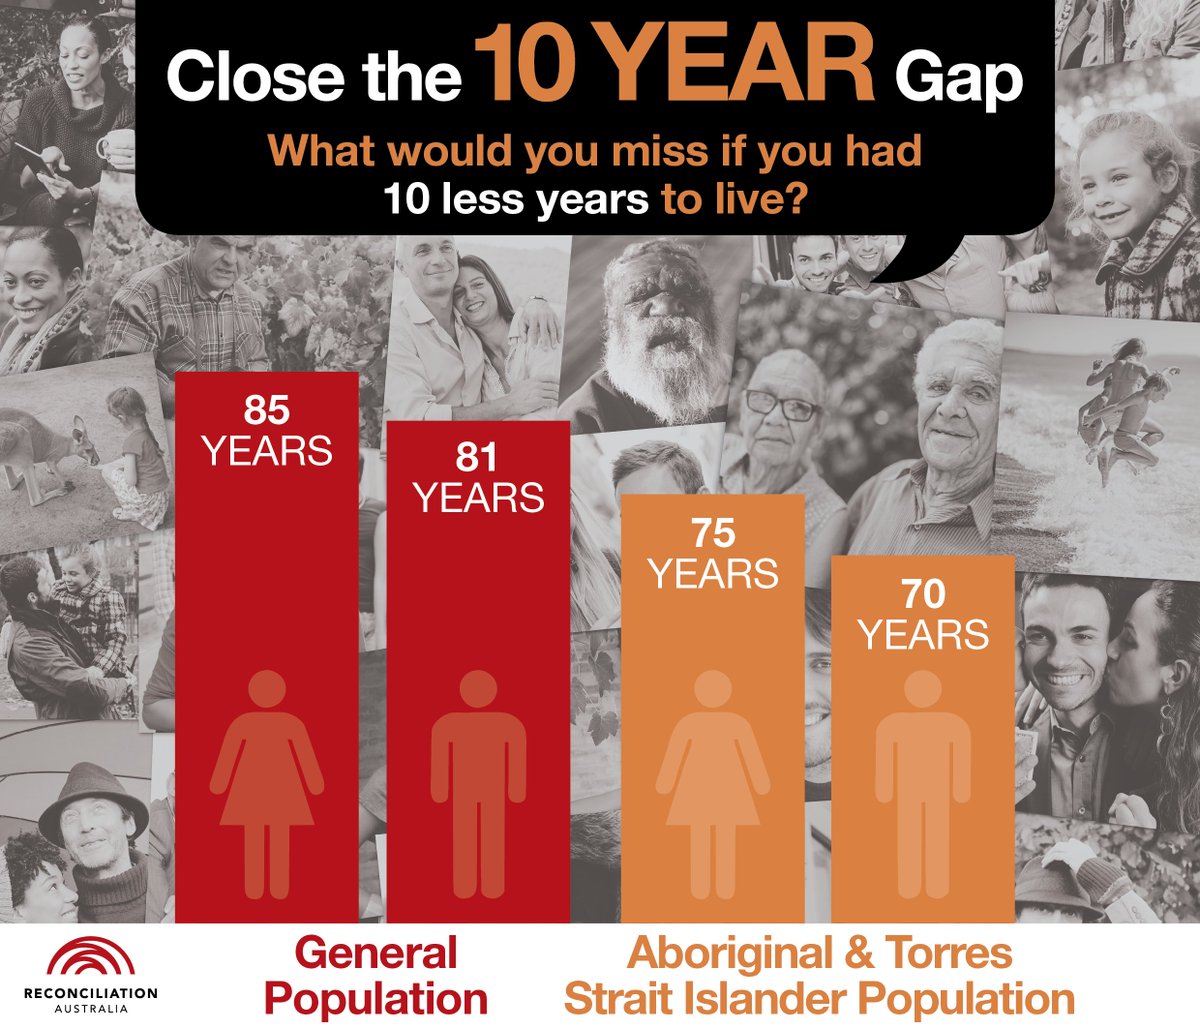 In the decade since COAG first committed to close the gap on Indigenous health and life expectancy, the gap has widened. Learn more in the #ClosetheGap 10-year Review bit.ly/2Bihi5Z